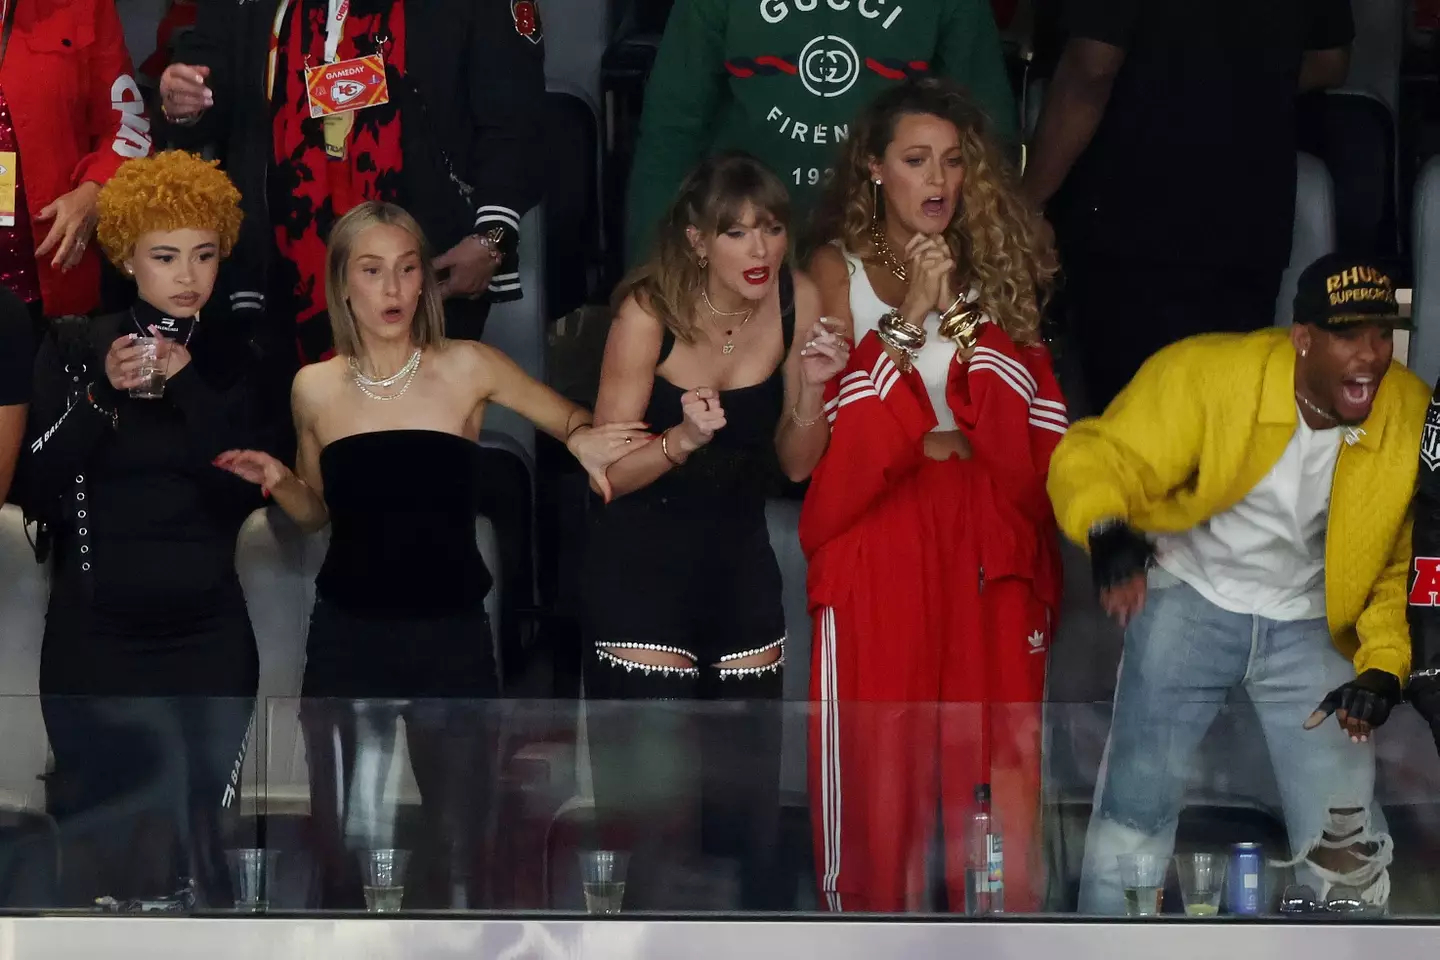 Taylor is rumoured to have had Kanye West kicked out of the game.